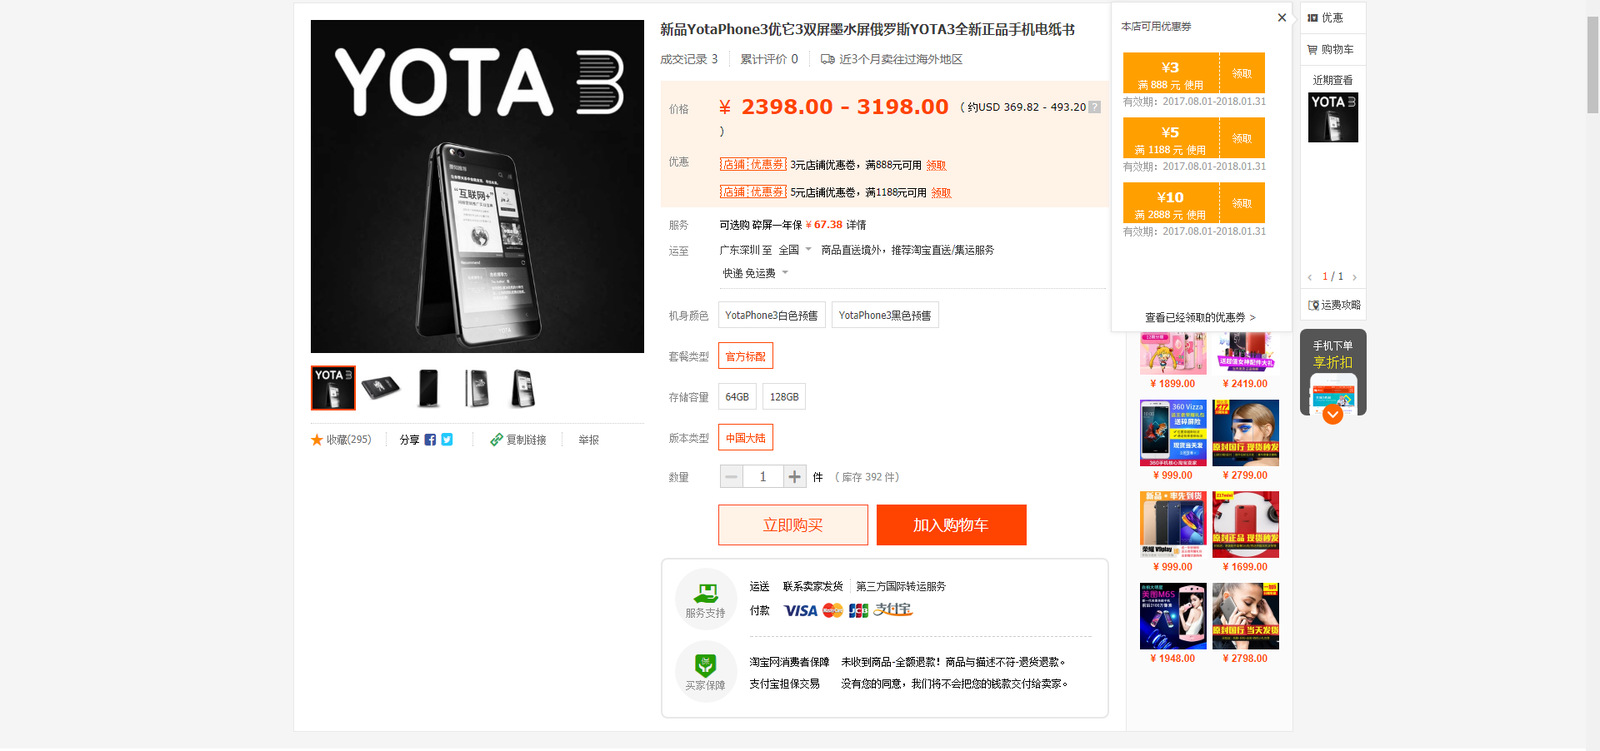 Pre-orders for YotaPhone 3 (Yota 3) have opened in China, and we stand on the sidelines and wait... - My, Yota, Yotaphone, Yotaphone 2, , Yoru, China, 